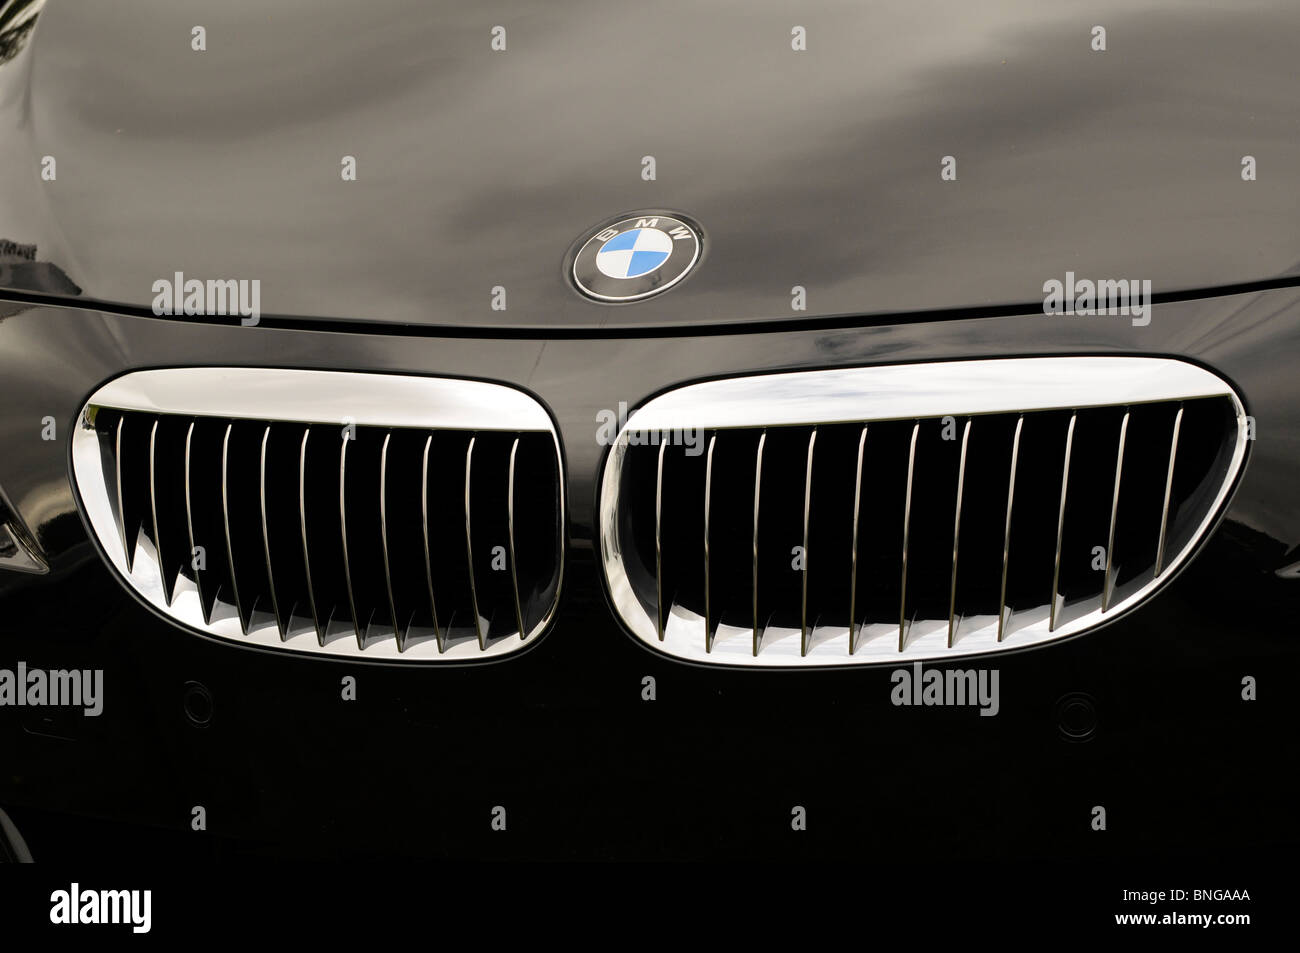 https://c8.alamy.com/comp/BNGAAA/bmw-badge-and-front-radiator-grill-BNGAAA.jpg